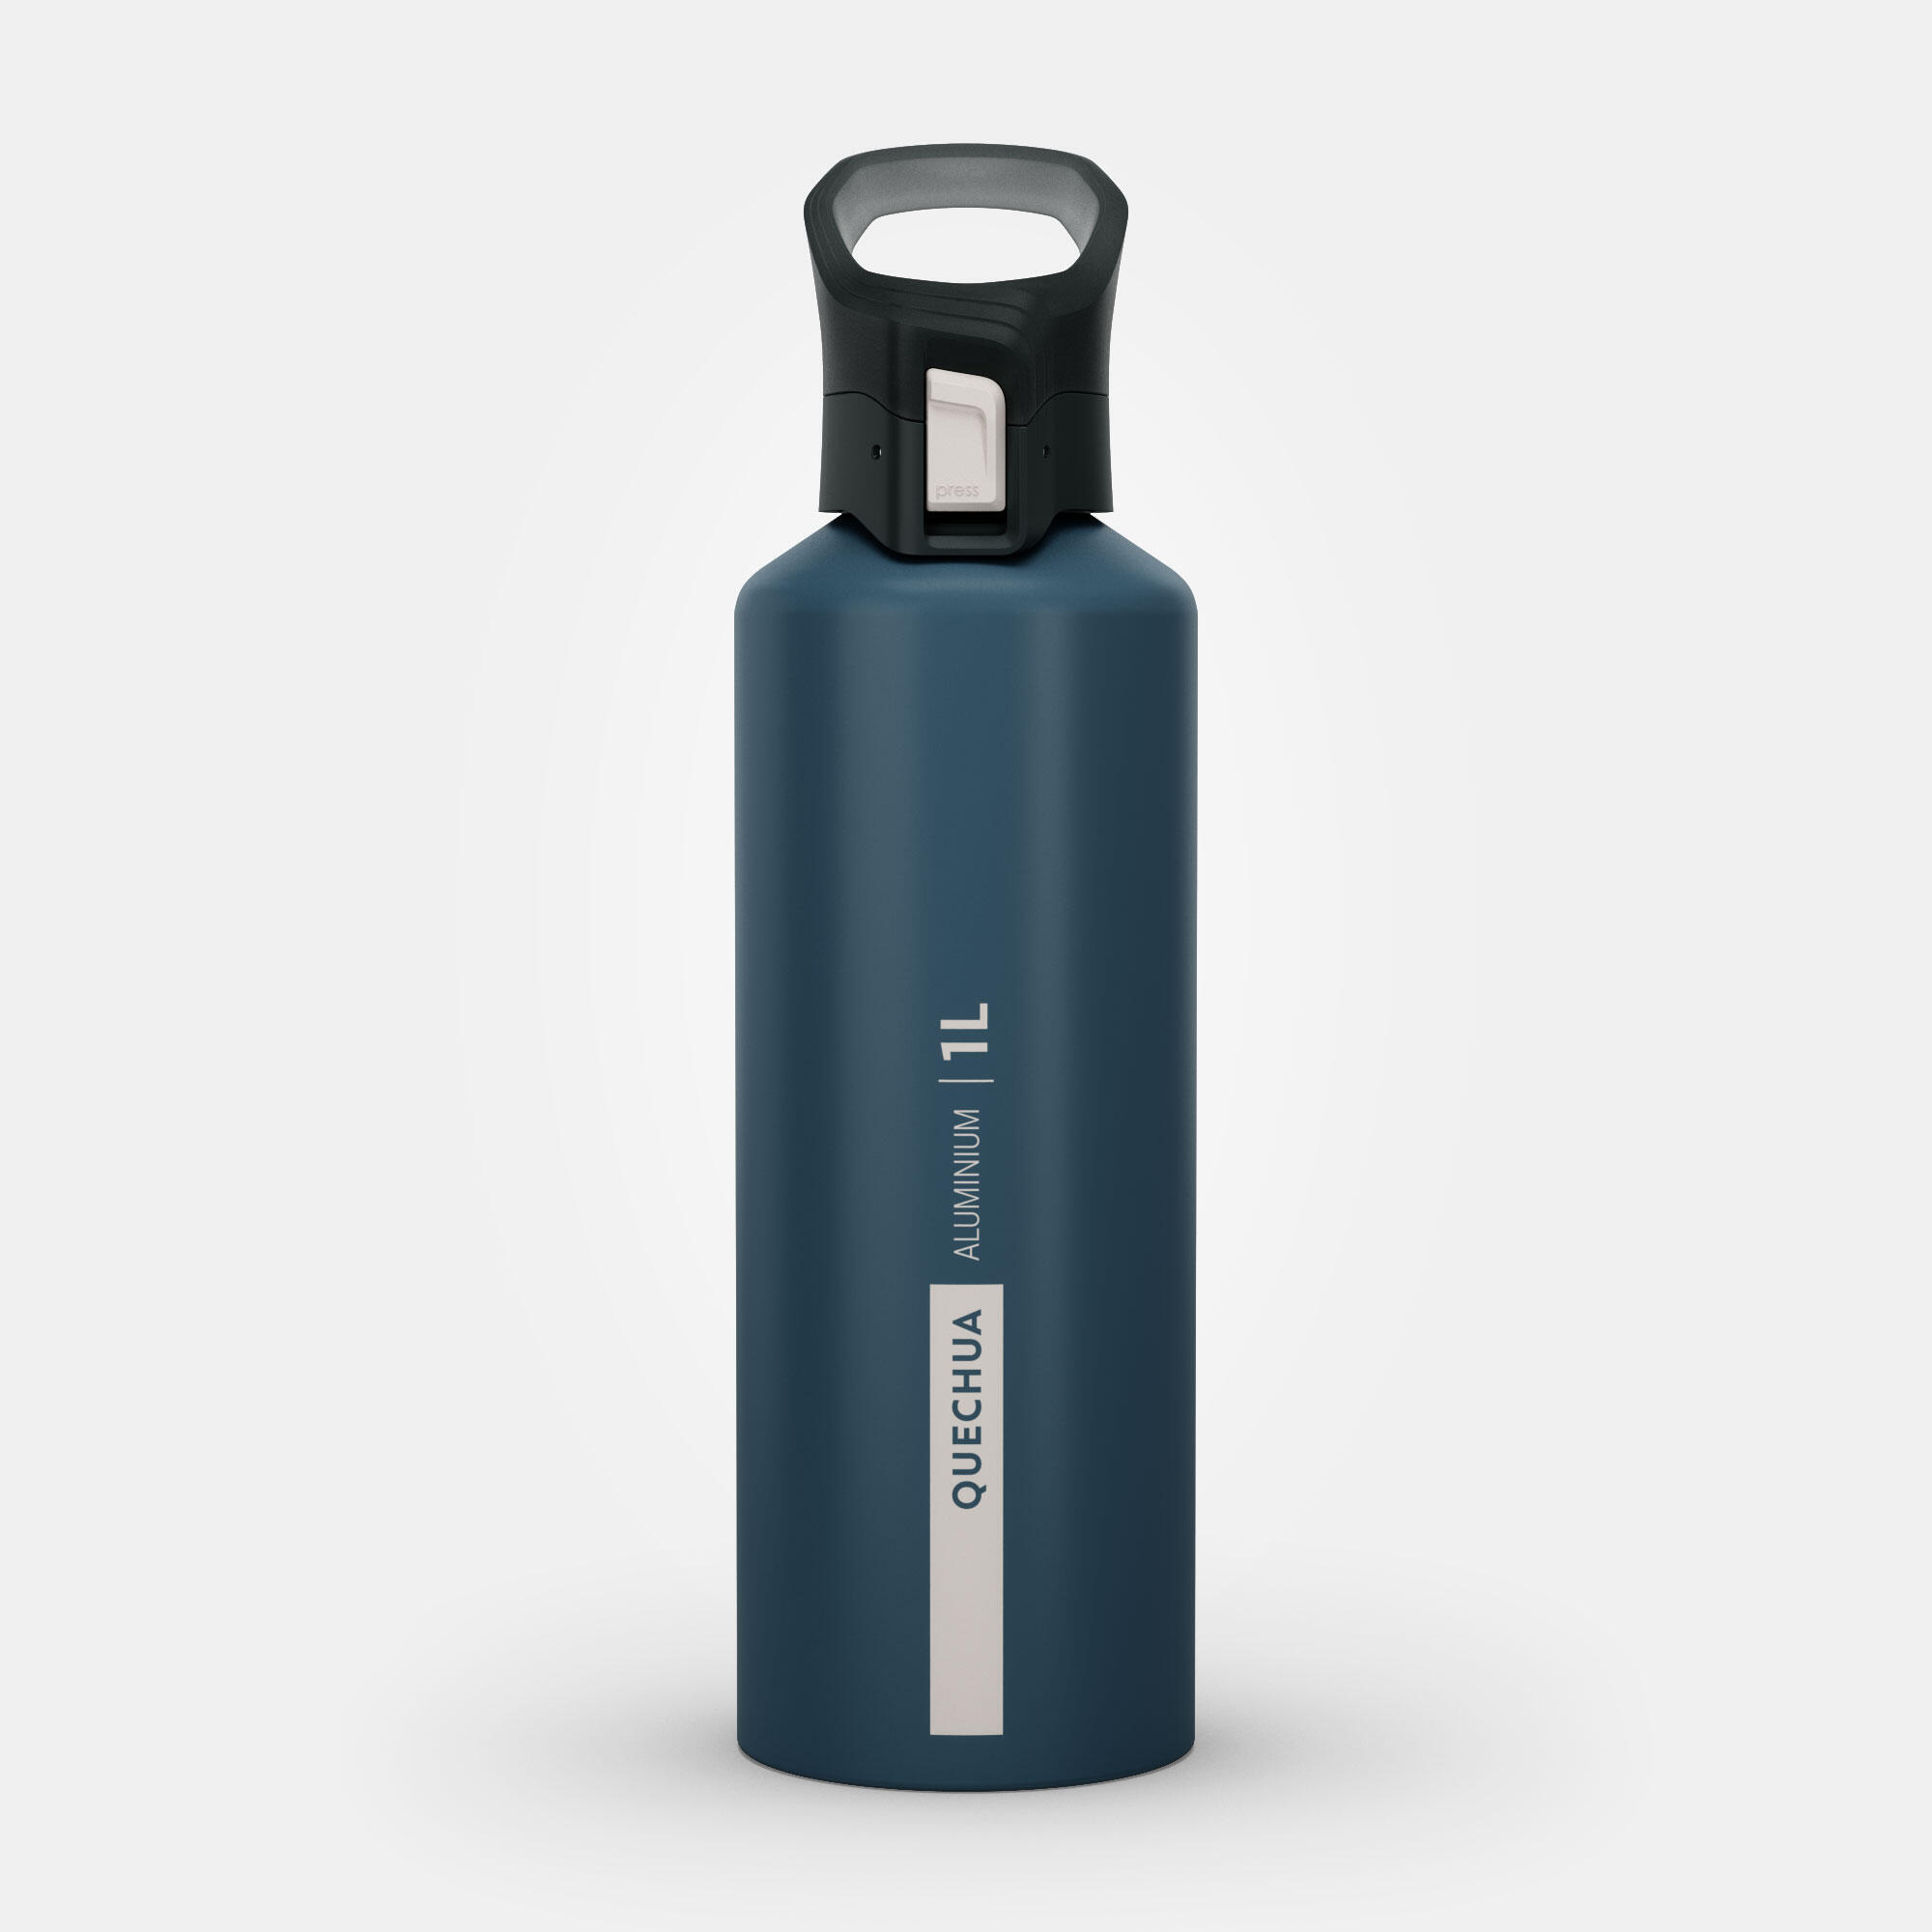 Aluminium 1 L water bottle with quick opening cap for hiking - Blue 10/10